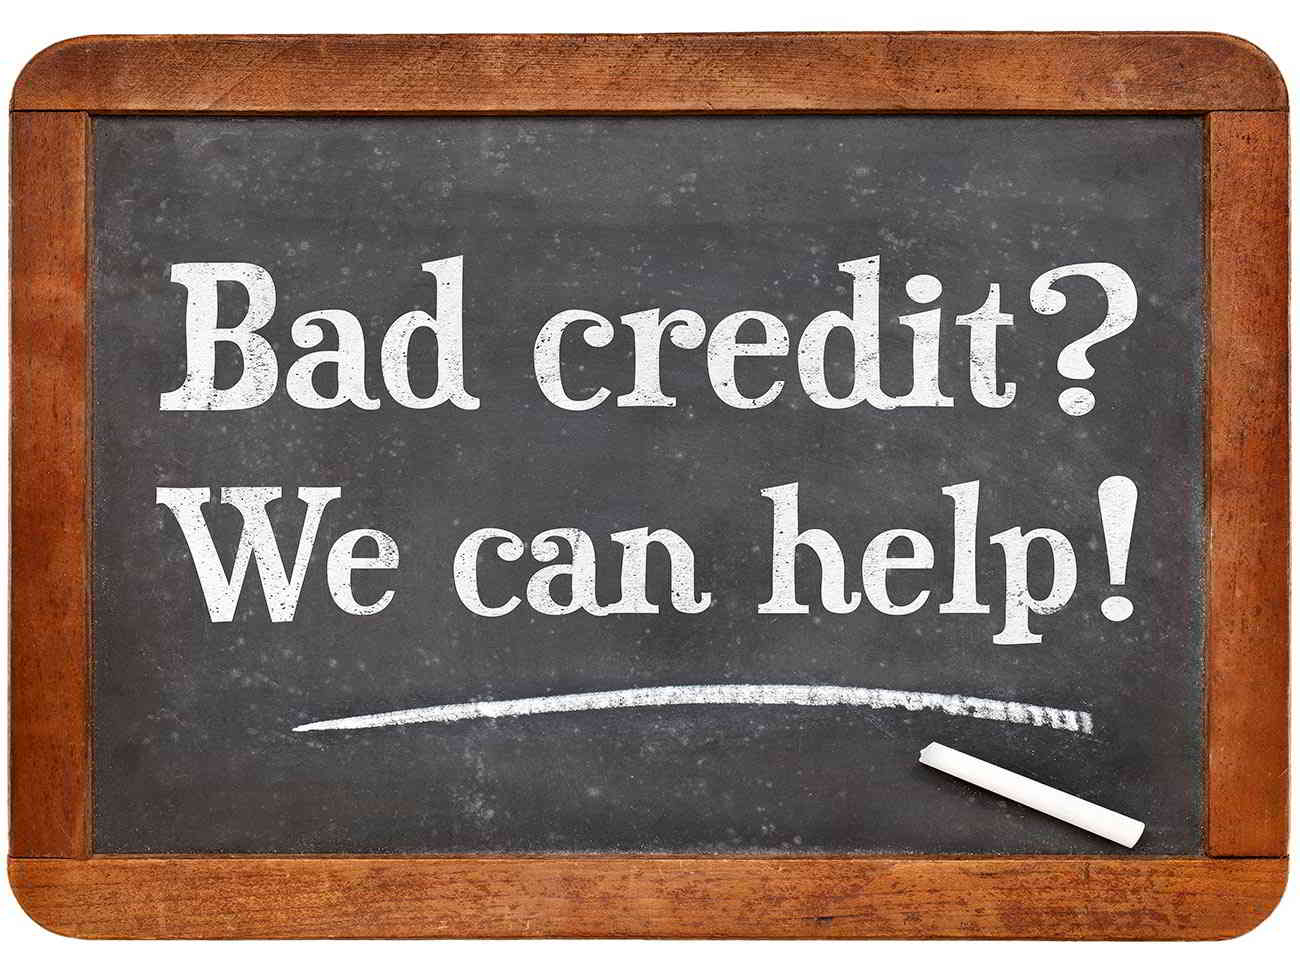 bad credit we can help sign